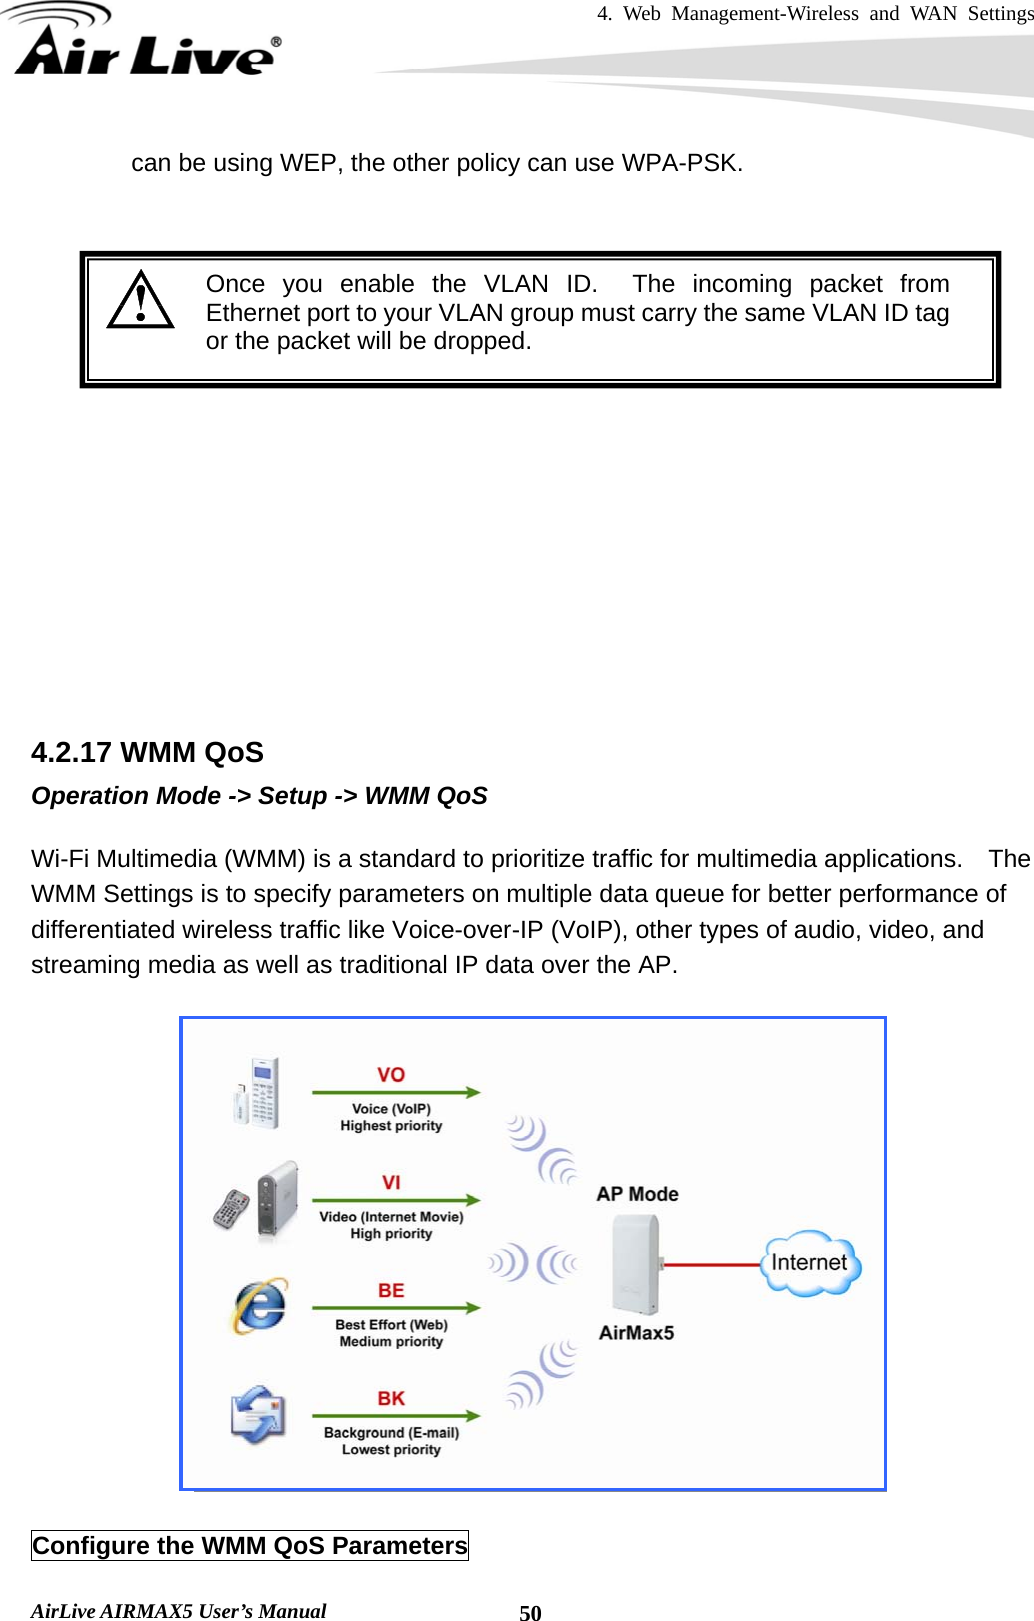 4. Web Management-Wireless and WAN Settings   AirLive AIRMAX5 User’s Manual  50can be using WEP, the other policy can use WPA-PSK.    Once you enable the VLAN ID.  The incoming packet from Ethernet port to your VLAN group must carry the same VLAN ID tag or the packet will be dropped.           4.2.17 WMM QoS Operation Mode -&gt; Setup -&gt; WMM QoS  Wi-Fi Multimedia (WMM) is a standard to prioritize traffic for multimedia applications.    The WMM Settings is to specify parameters on multiple data queue for better performance of differentiated wireless traffic like Voice-over-IP (VoIP), other types of audio, video, and streaming media as well as traditional IP data over the AP.    Configure the WMM QoS Parameters 